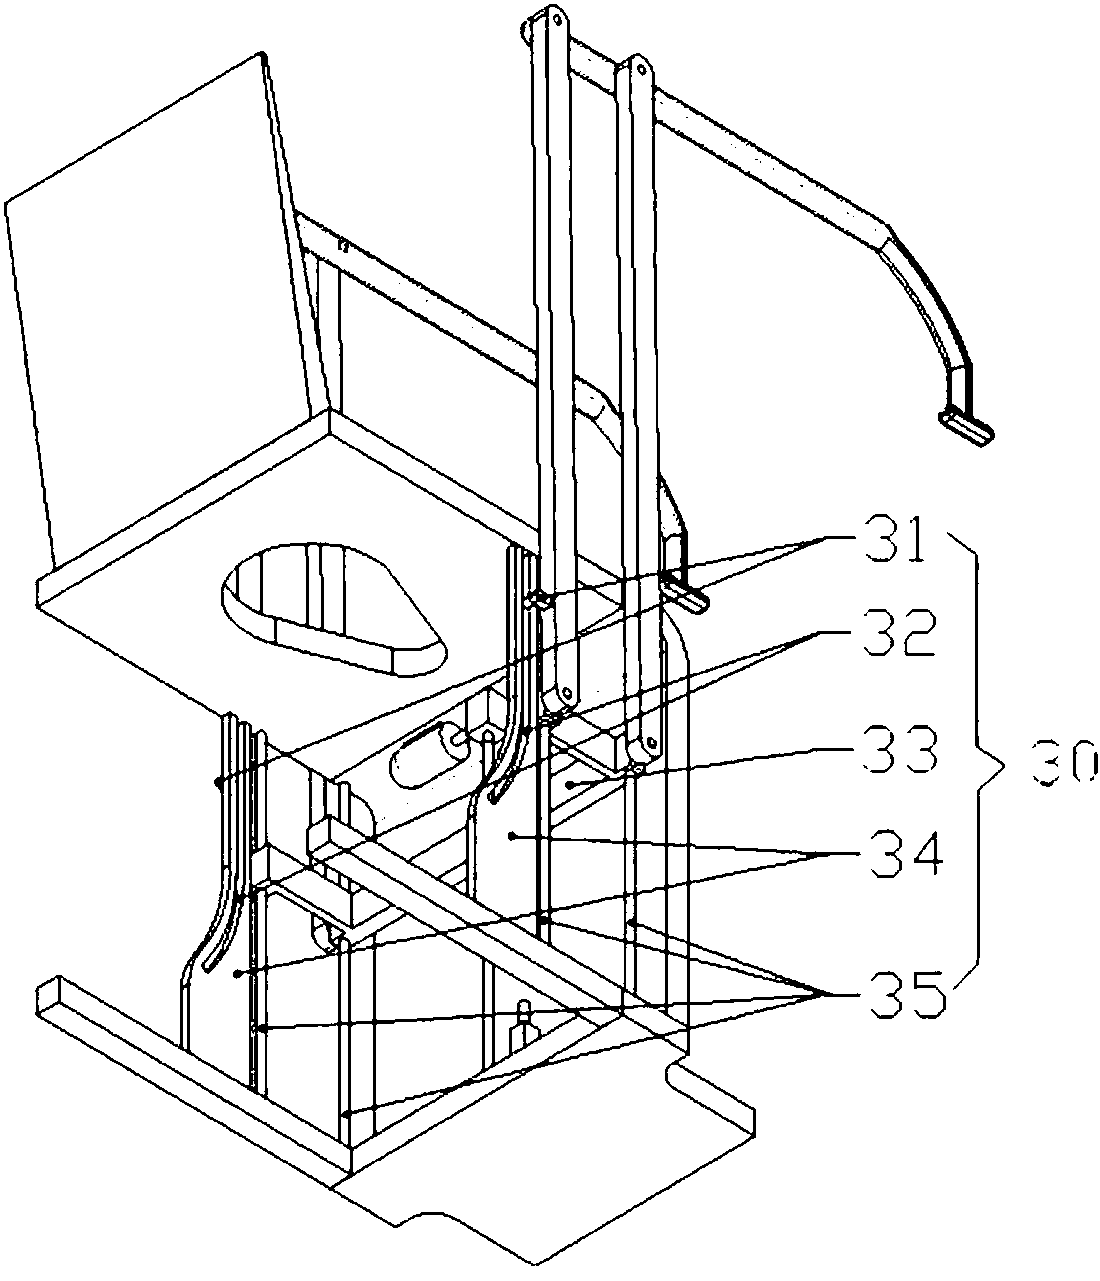 A double-link power-assisted toilet